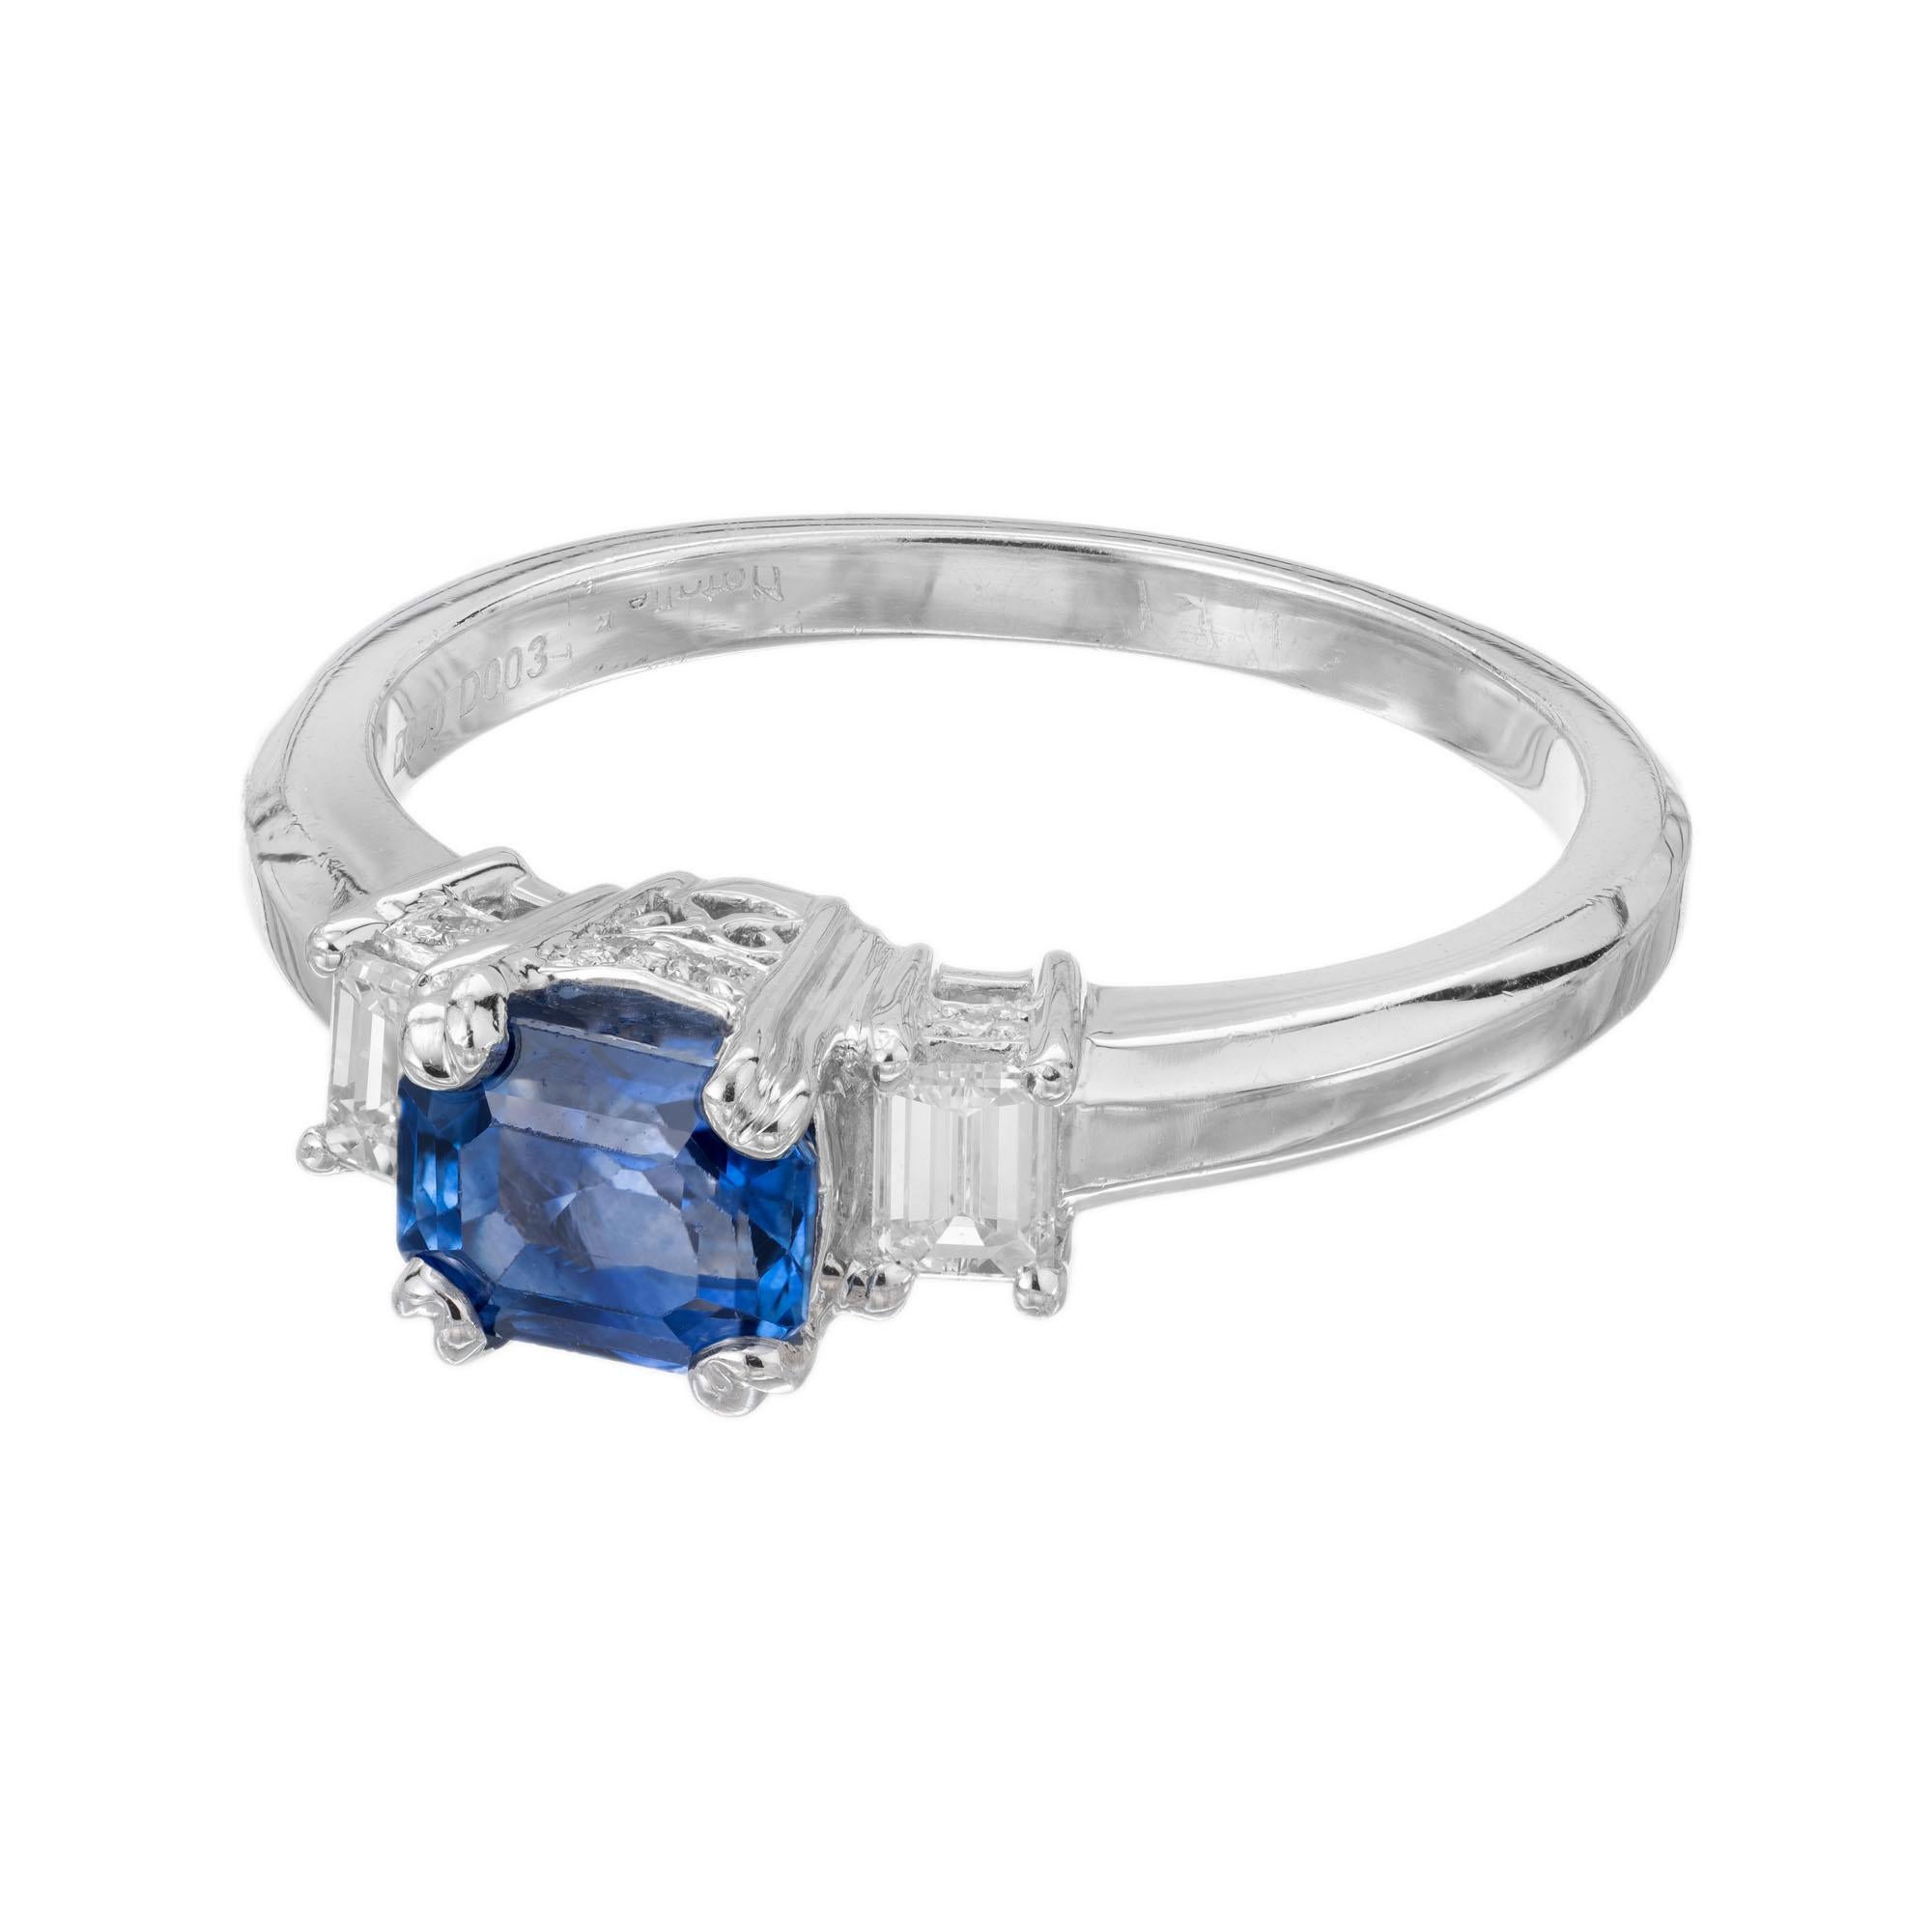 Vintage step cut blue sapphire and diamond engagment ring. AGL certified emerald step cut center stone set in a platinum three-stone setting with 2 emerald step cut diamonds and 8 full cut round accent diamonds. Created in the Peter Suchy Workshop.